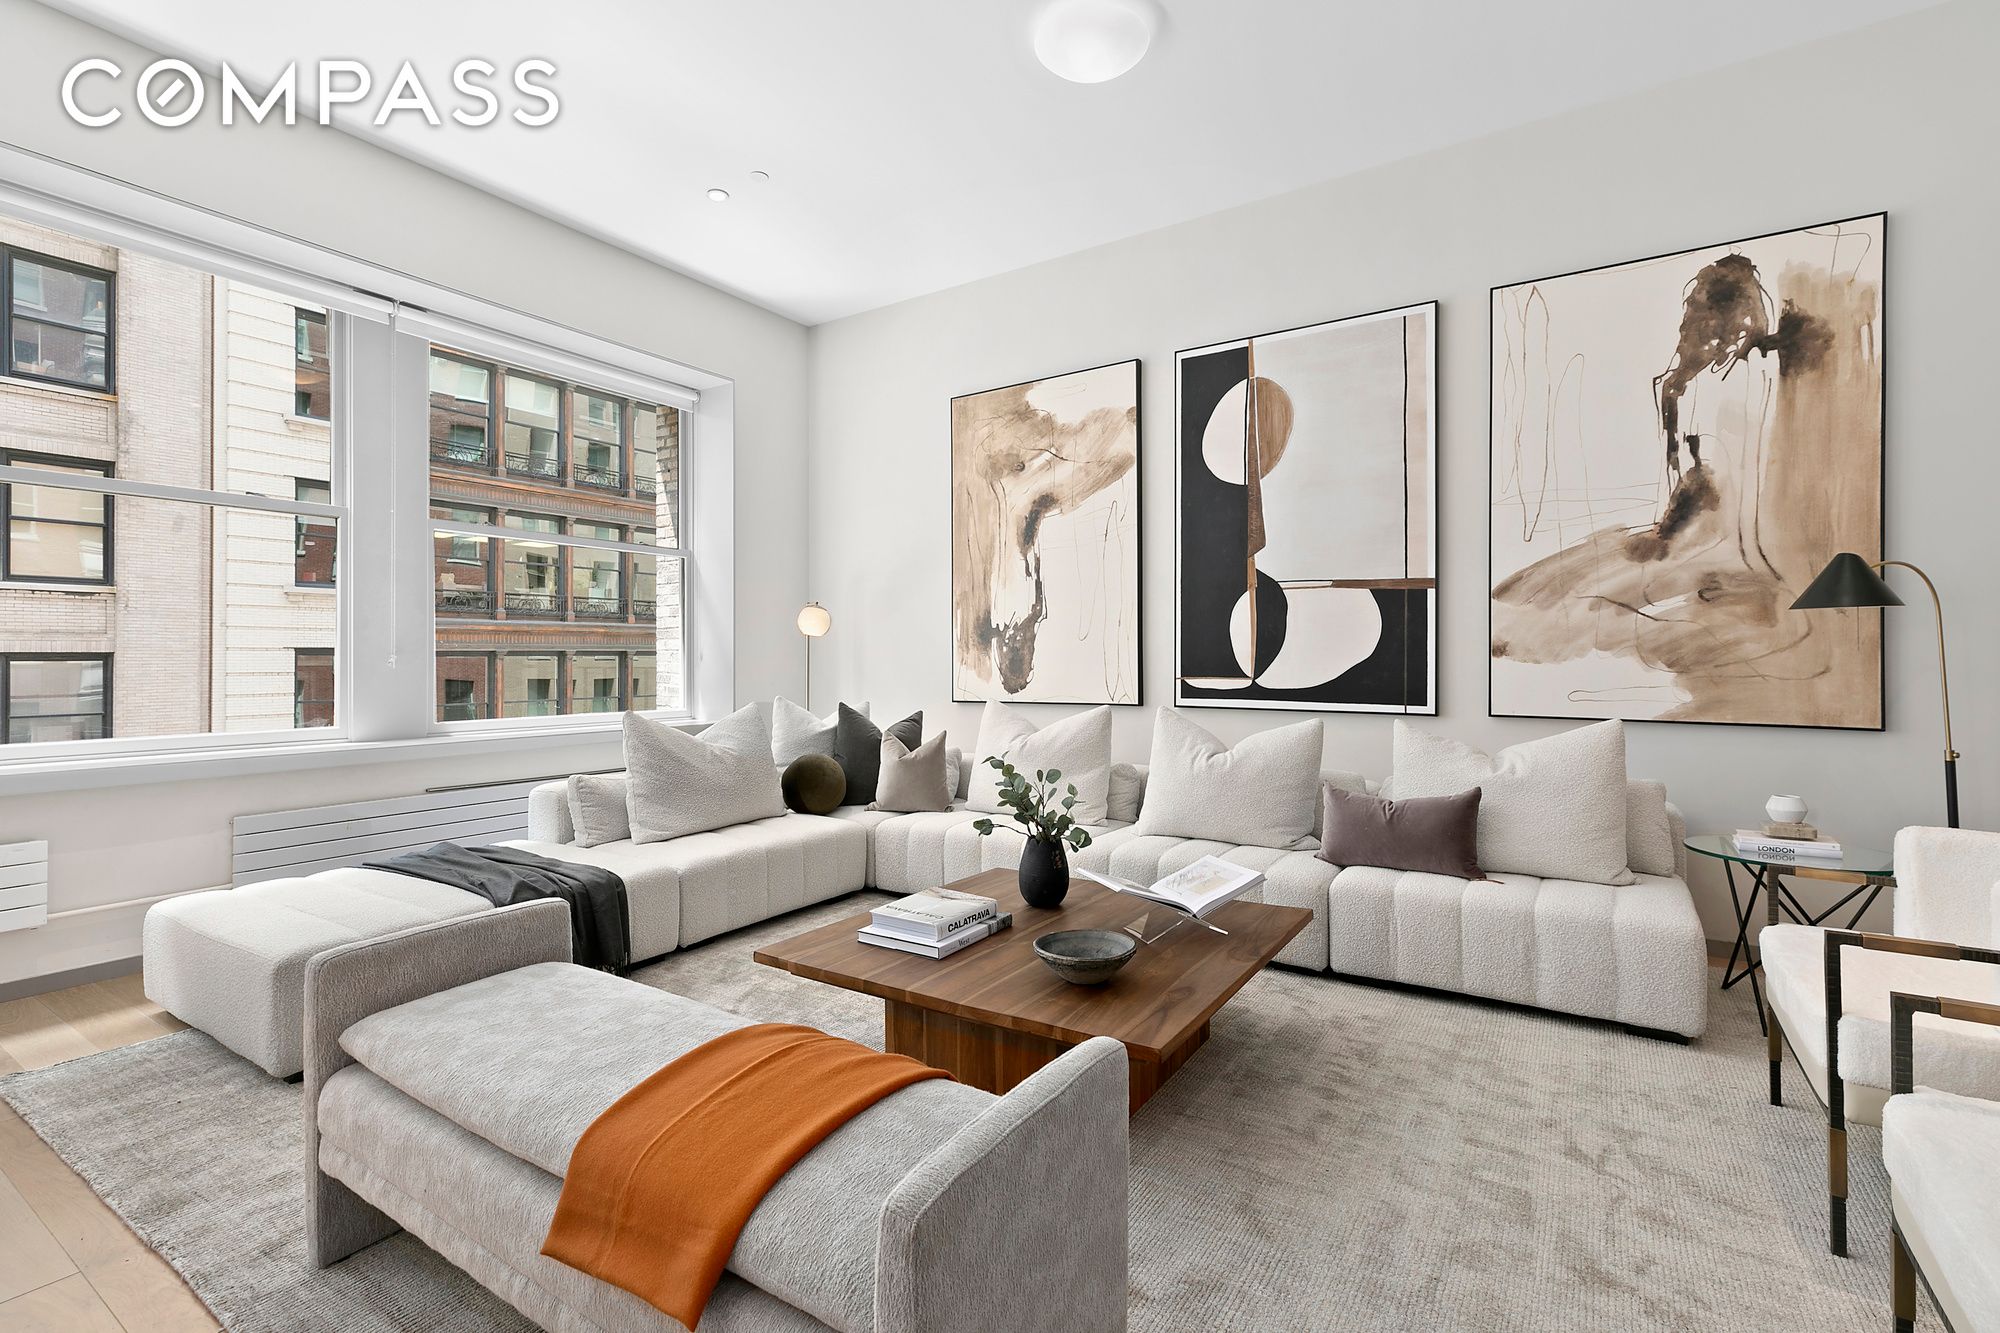 29 West 21st Street Ph, Flatiron, Downtown, NYC - 3 Bedrooms  
3.5 Bathrooms  
7 Rooms - 